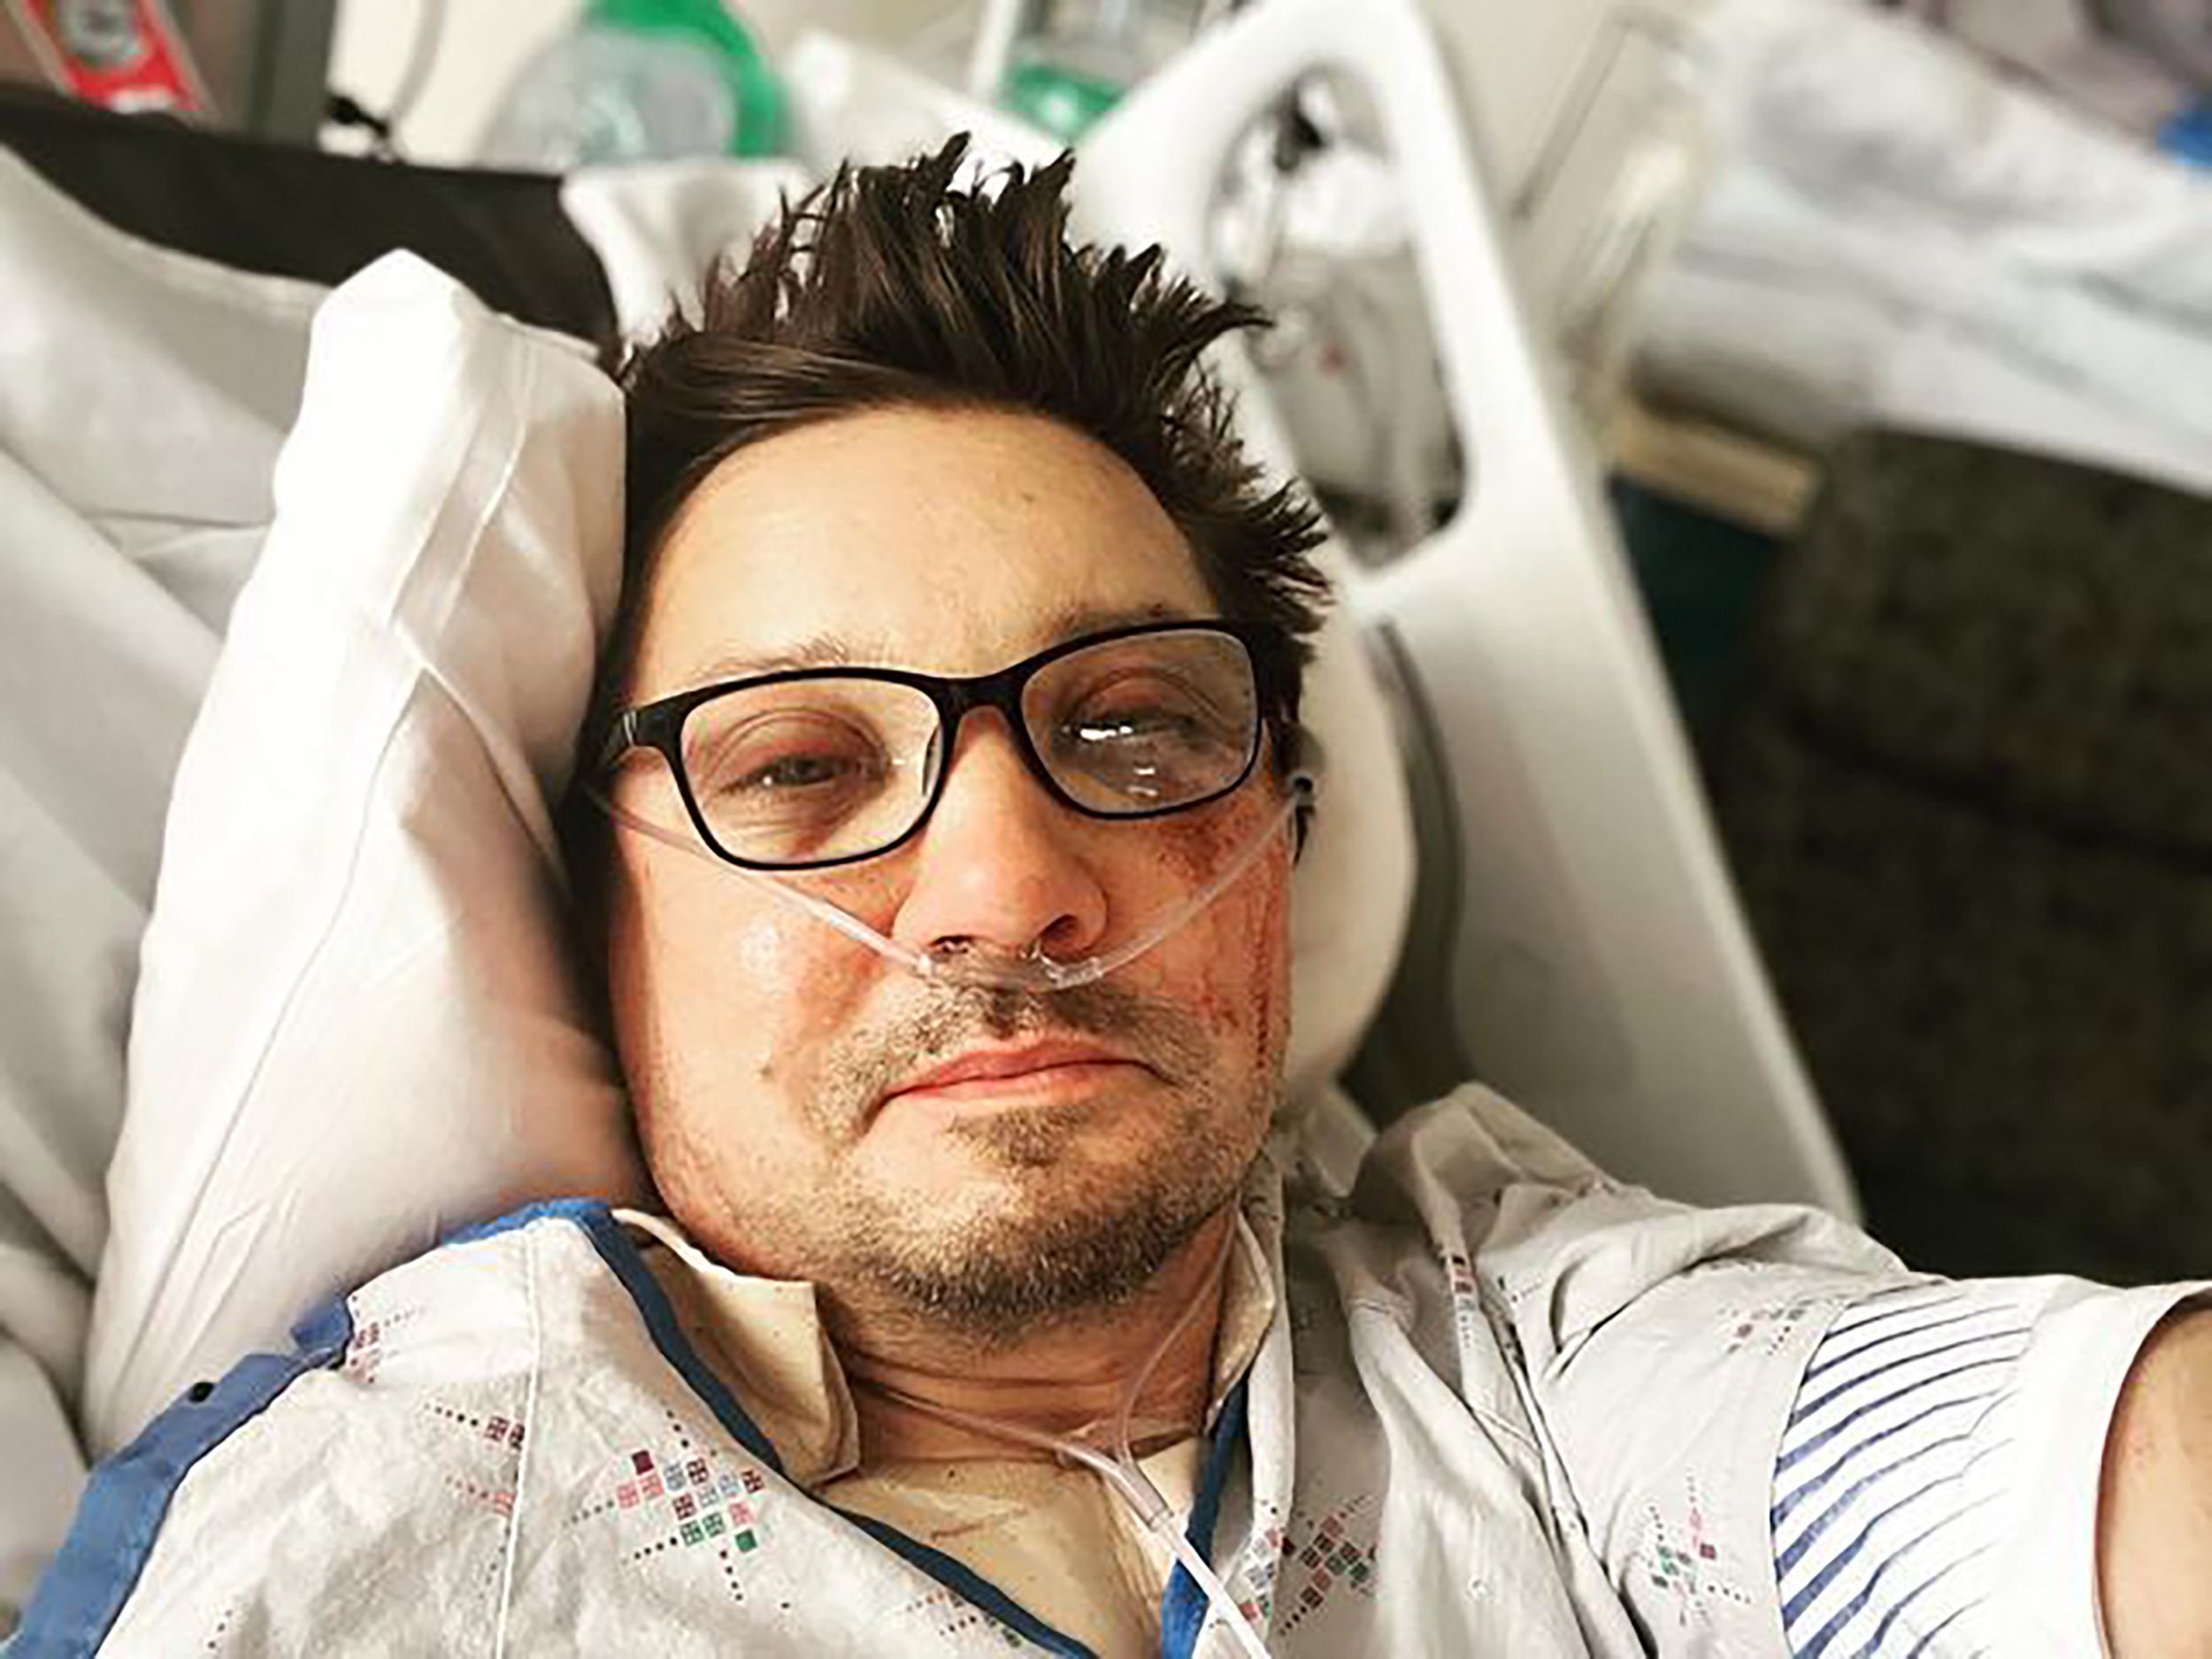 Jeremy Renner shares first photo since snow plowing accident